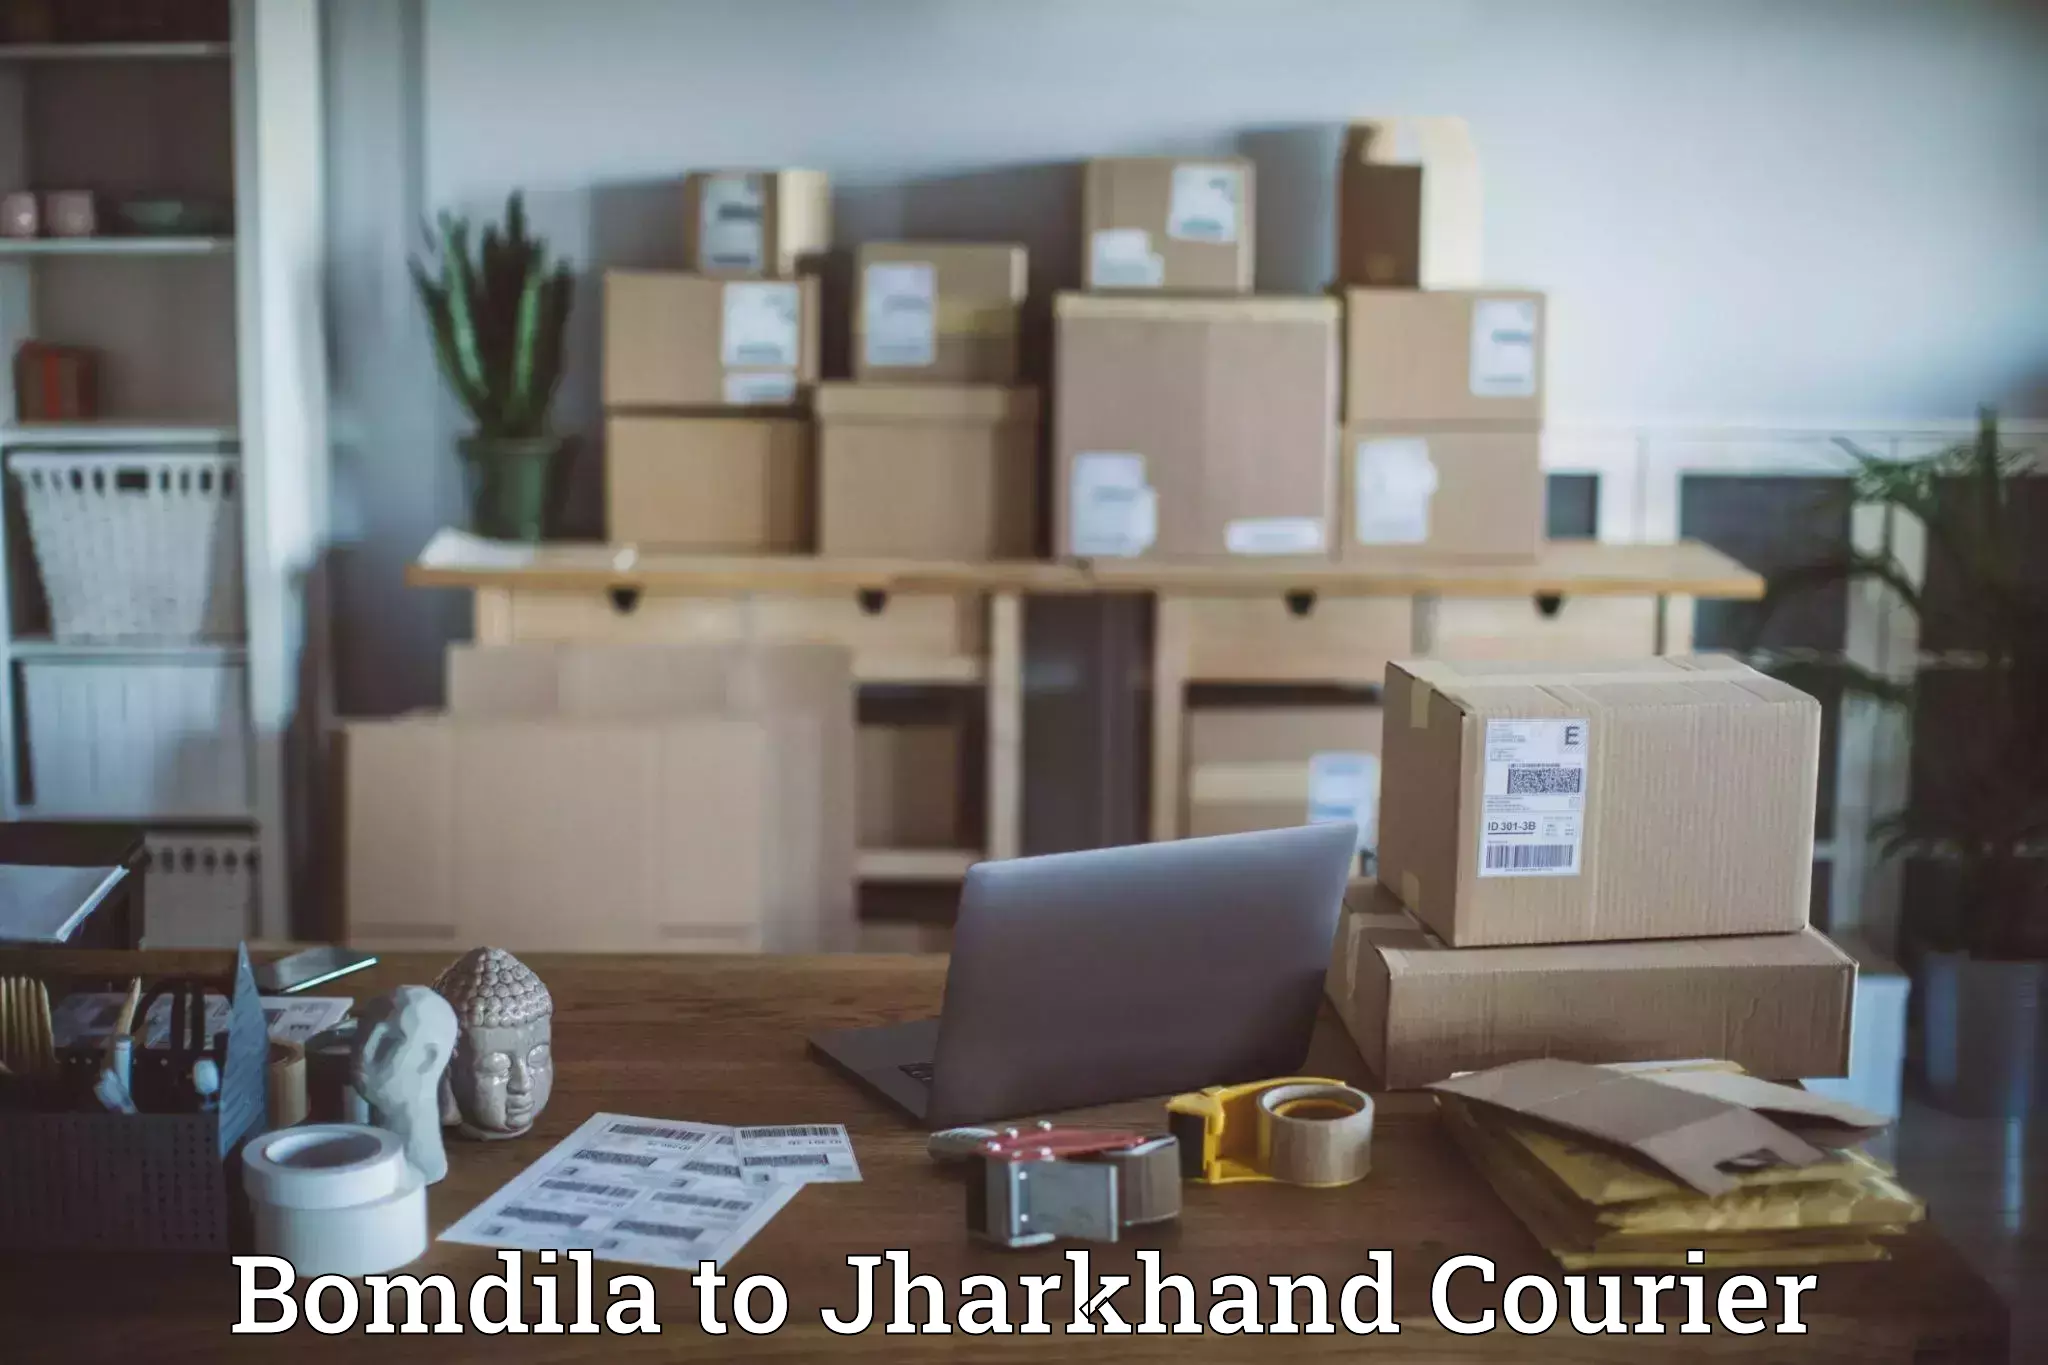 On-call courier service in Bomdila to Godabar Chatra